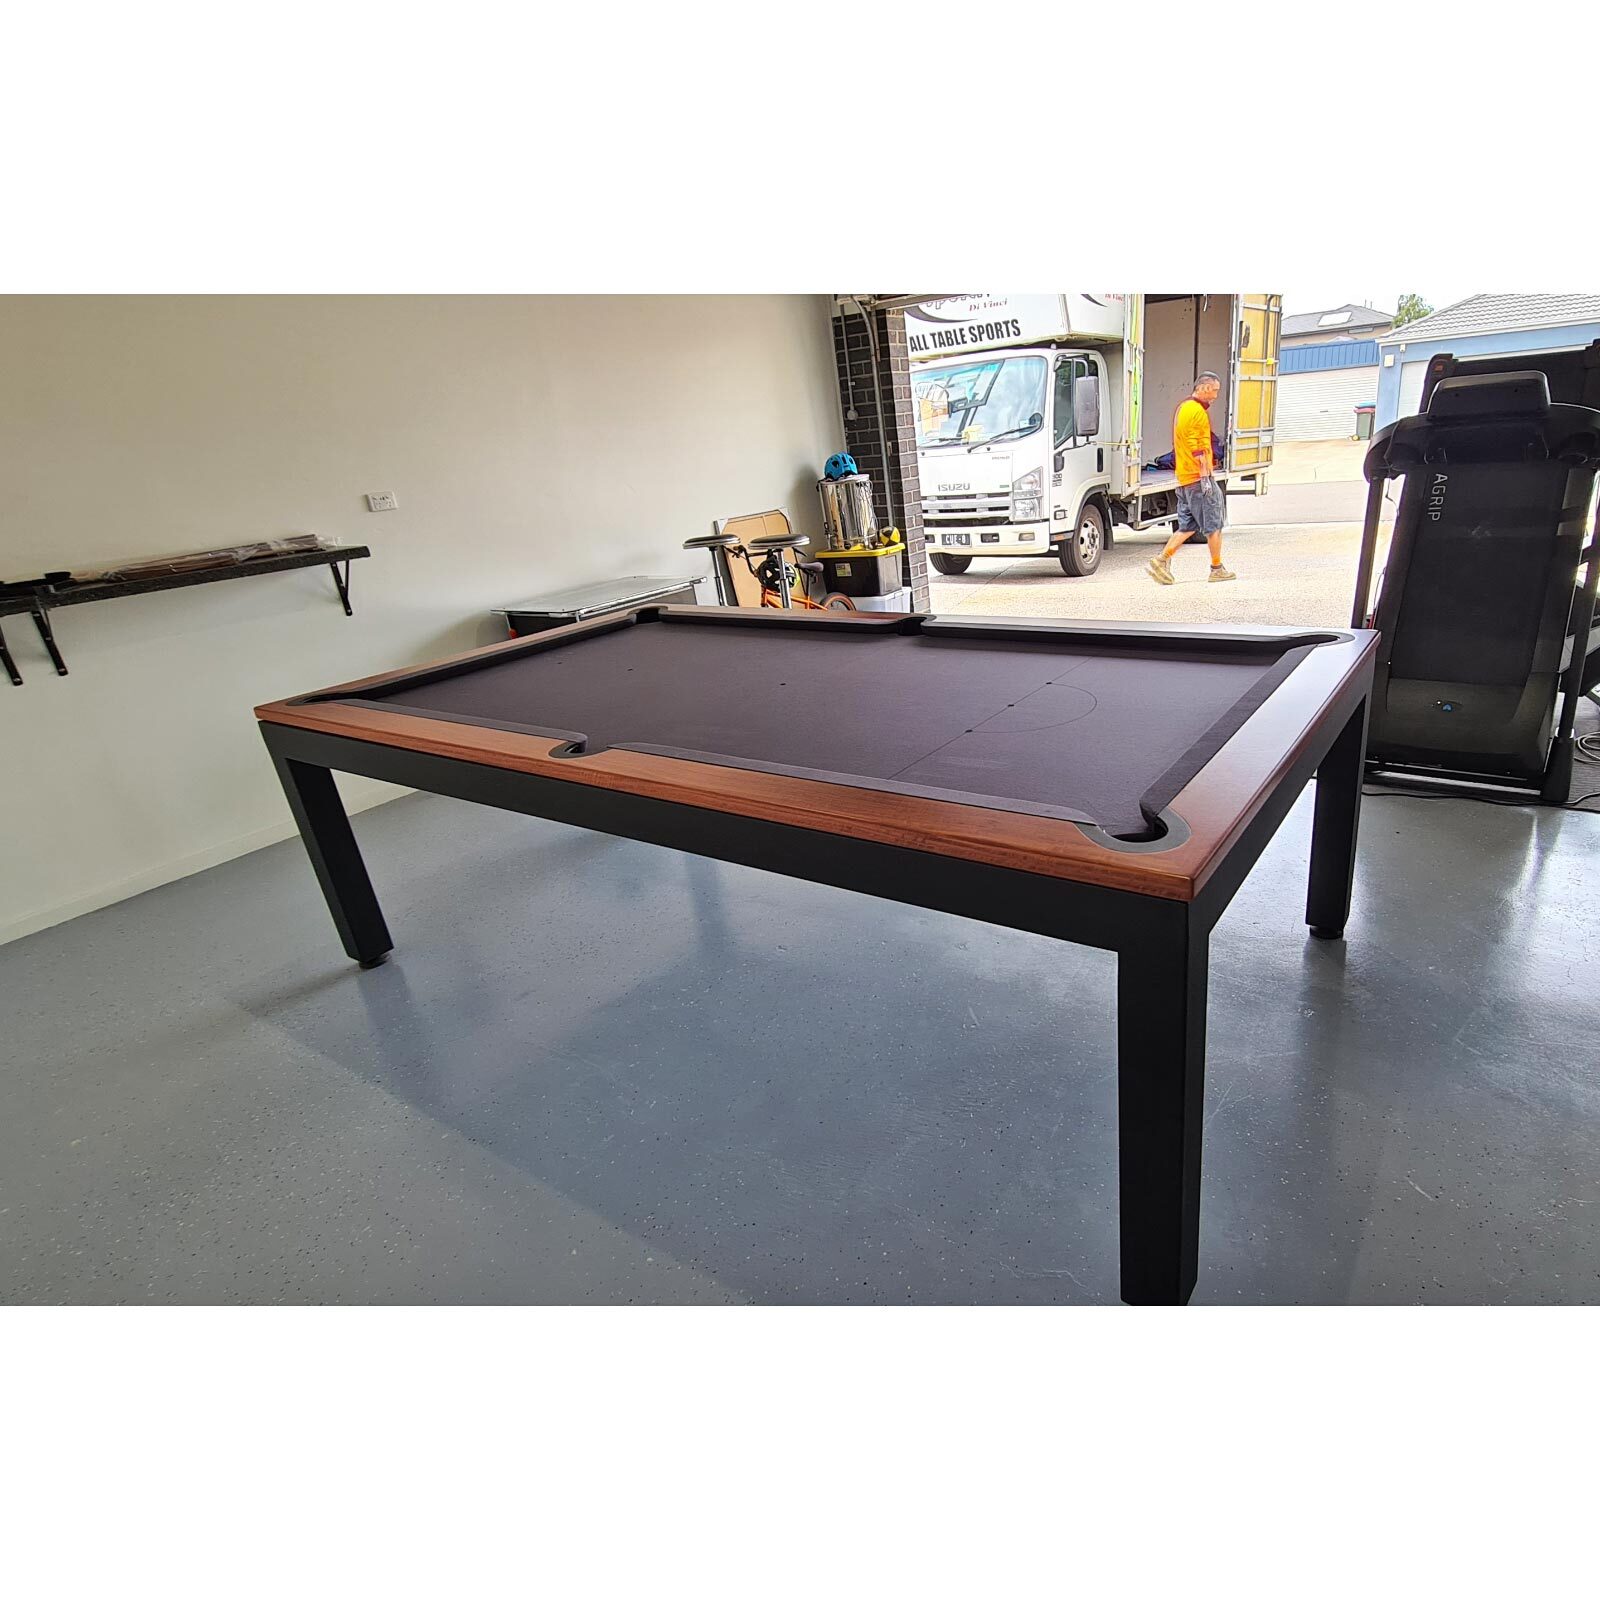 7FT or 8FT Pool / Dining / Boardroom Table from All Table Sports